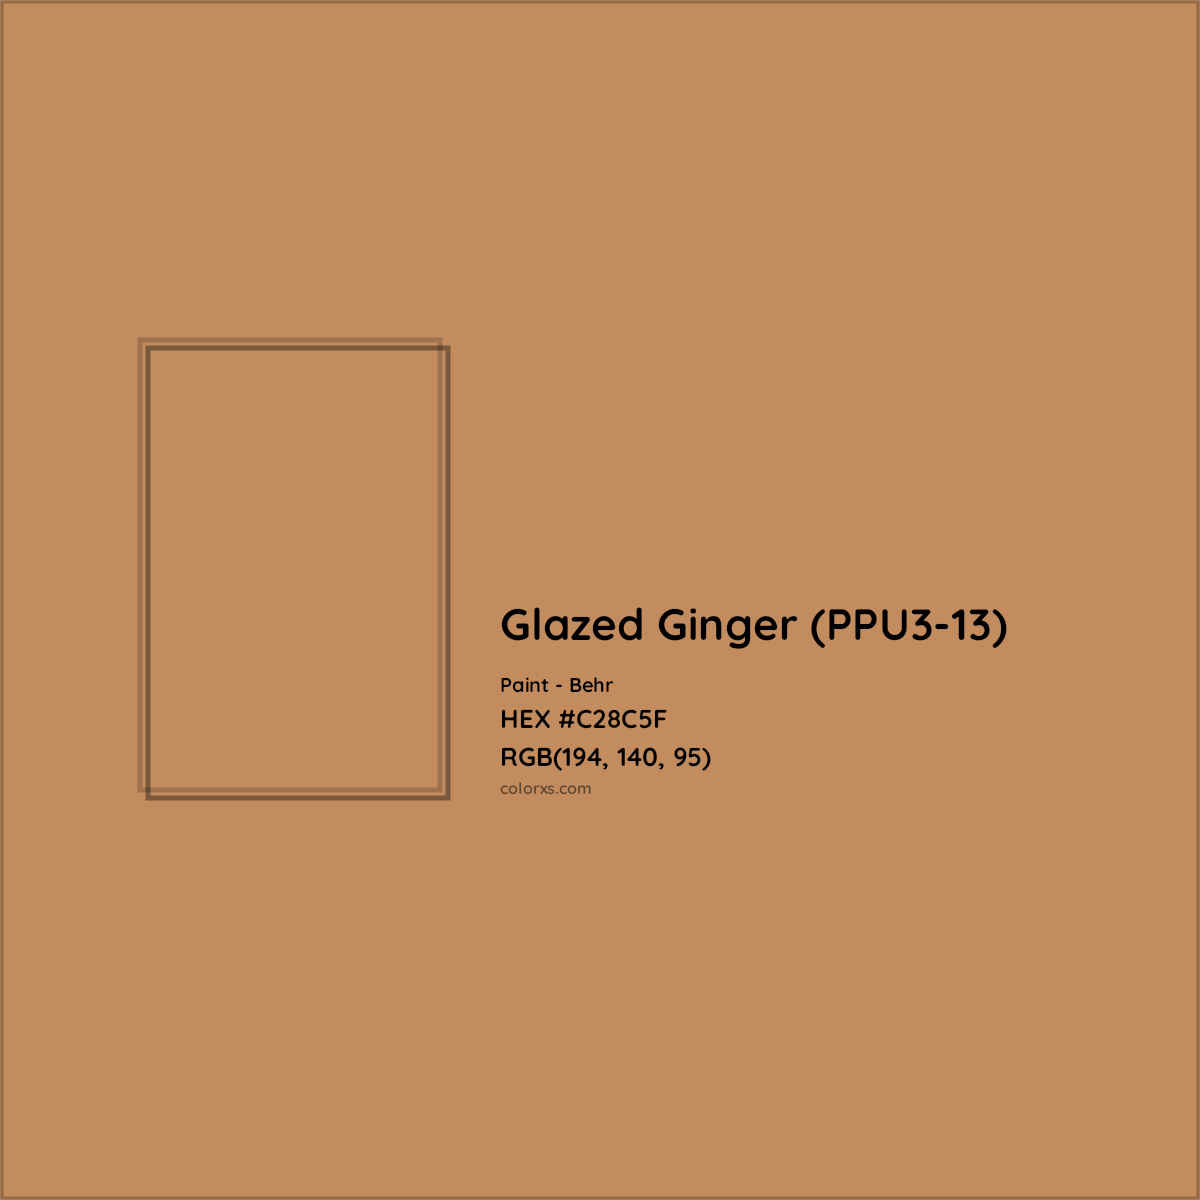 HEX #C28C5F Glazed Ginger (PPU3-13) Paint Behr - Color Code